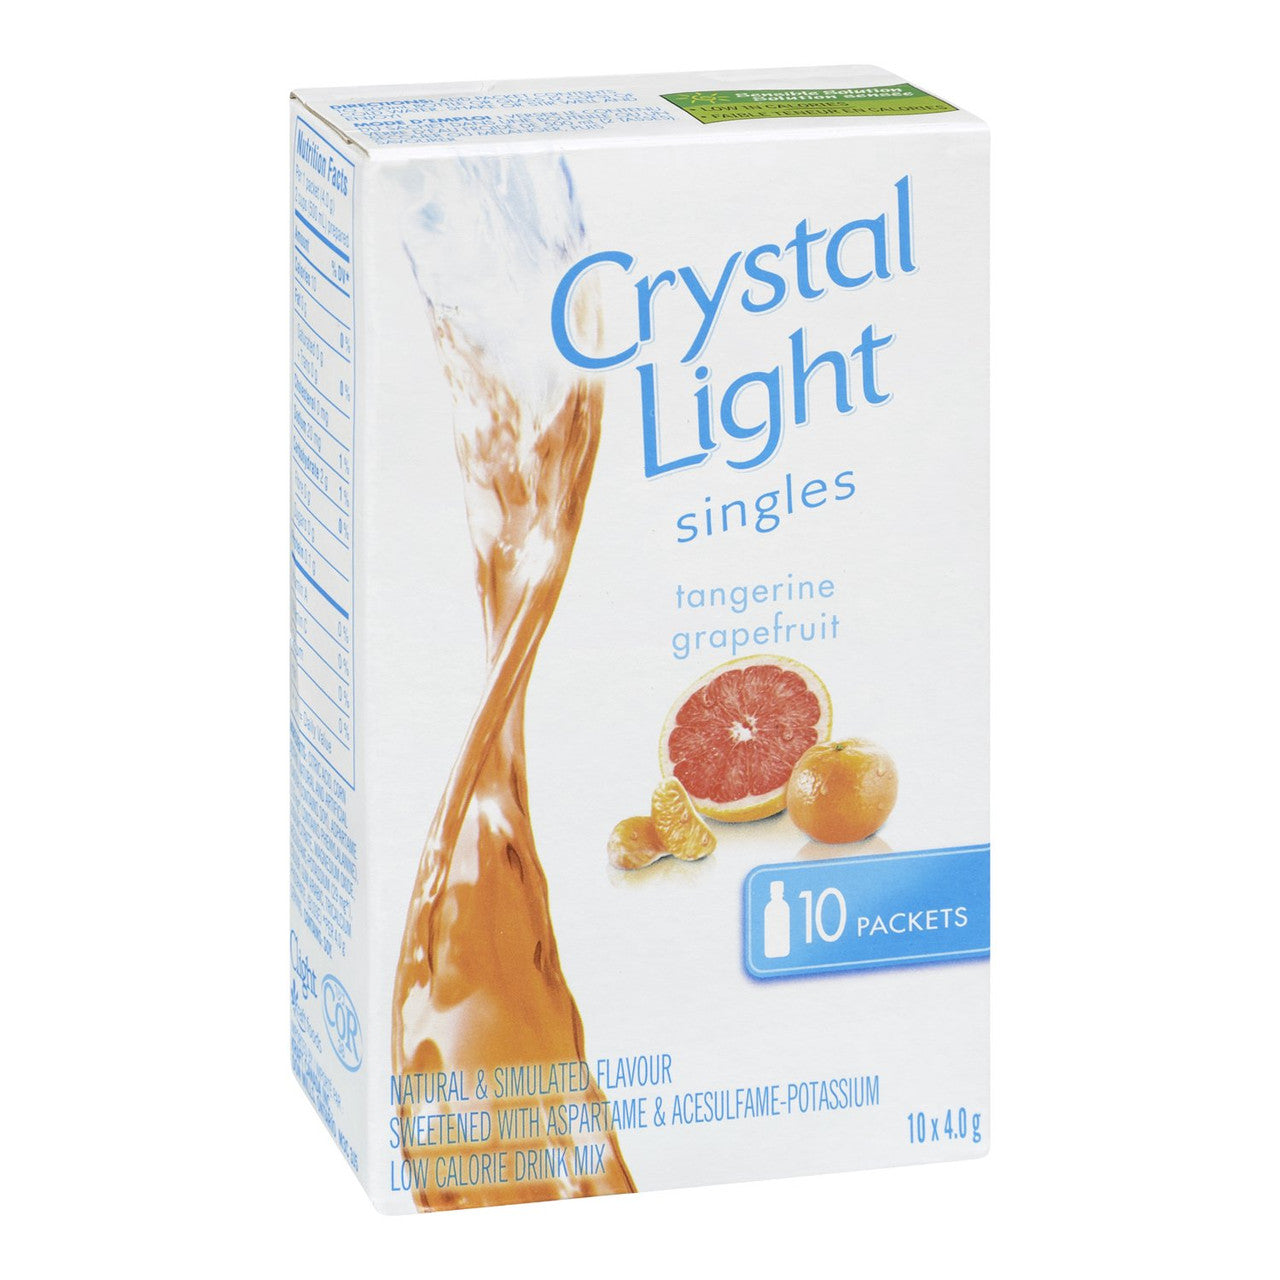 CRYSTAL LIGHT SINGLES Tangerine Grapefruit, 40g 10ct {Imported from Canada}